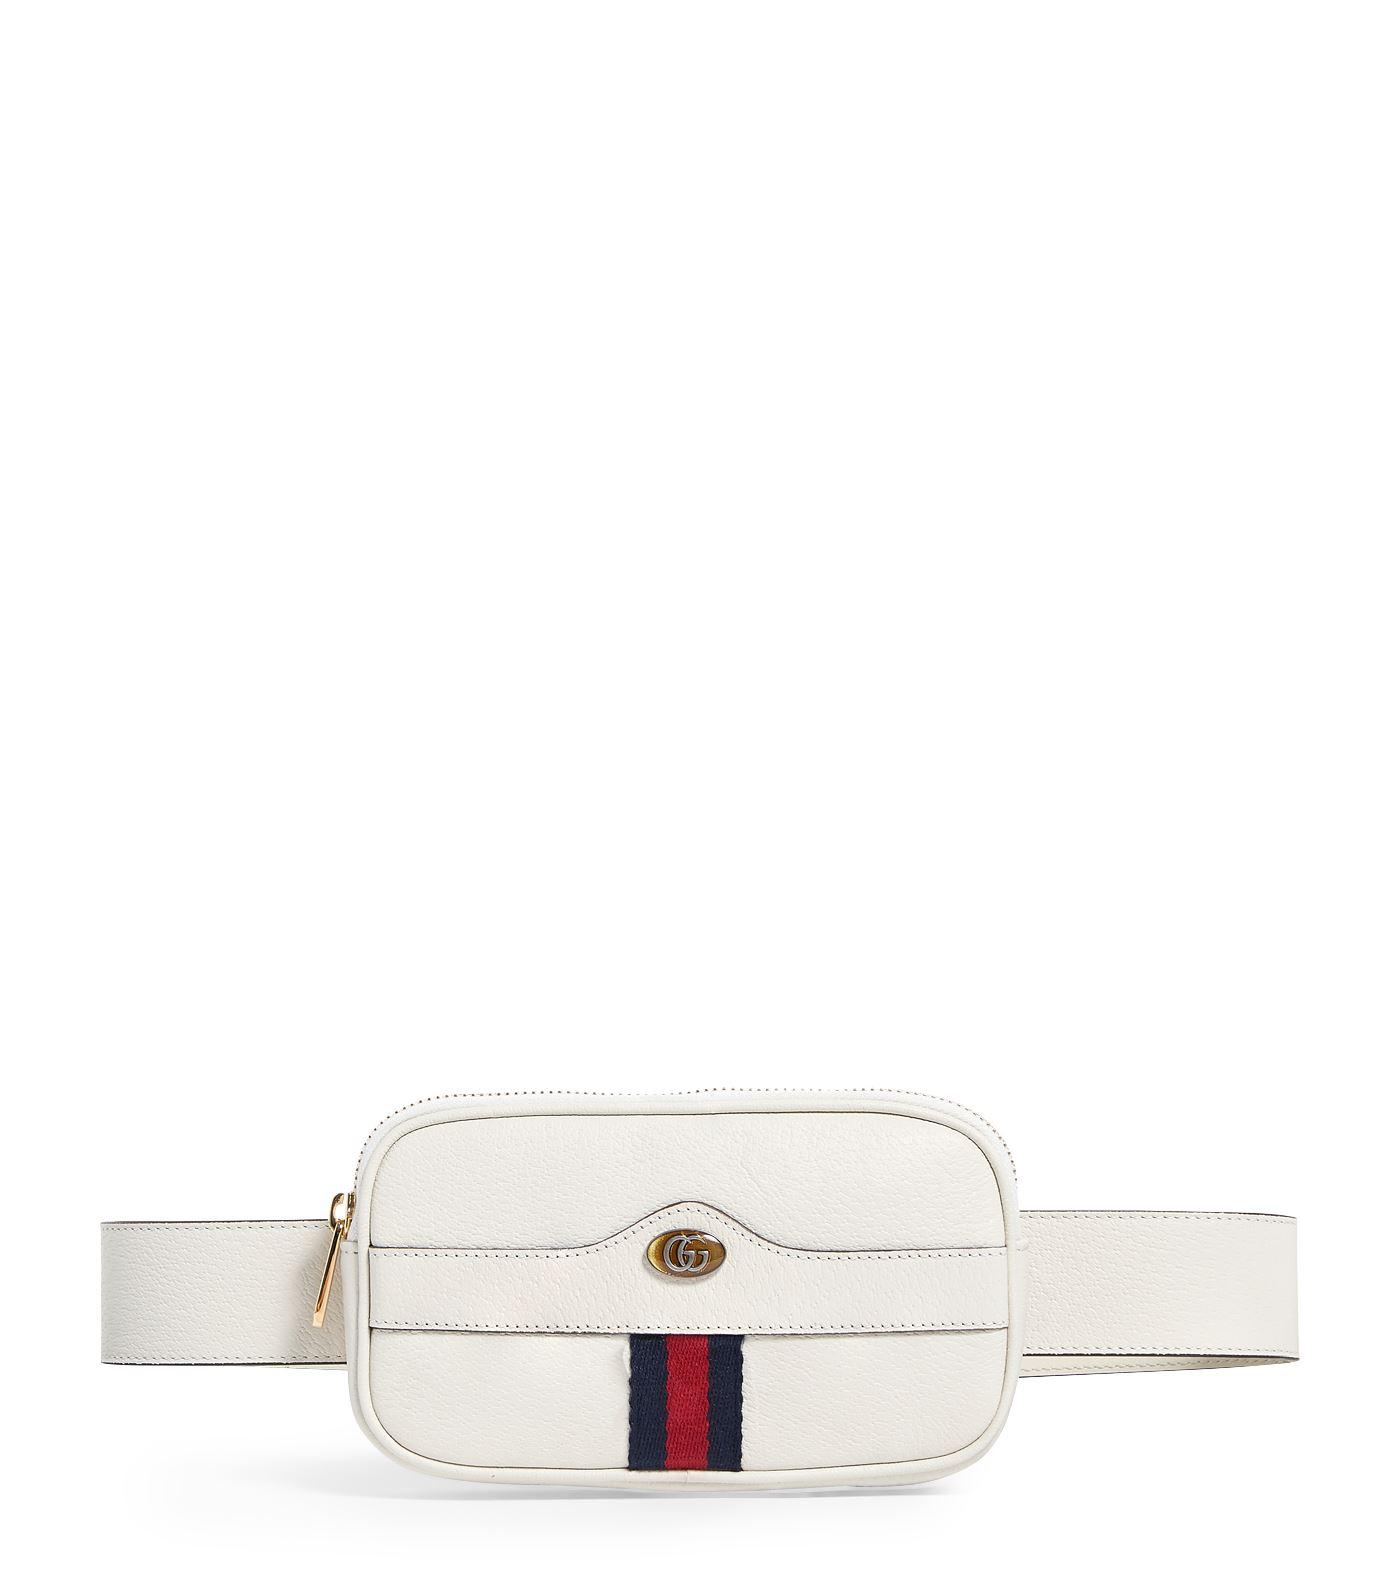 Gucci Small Leather Ophidia Belt Bag in White - Lyst